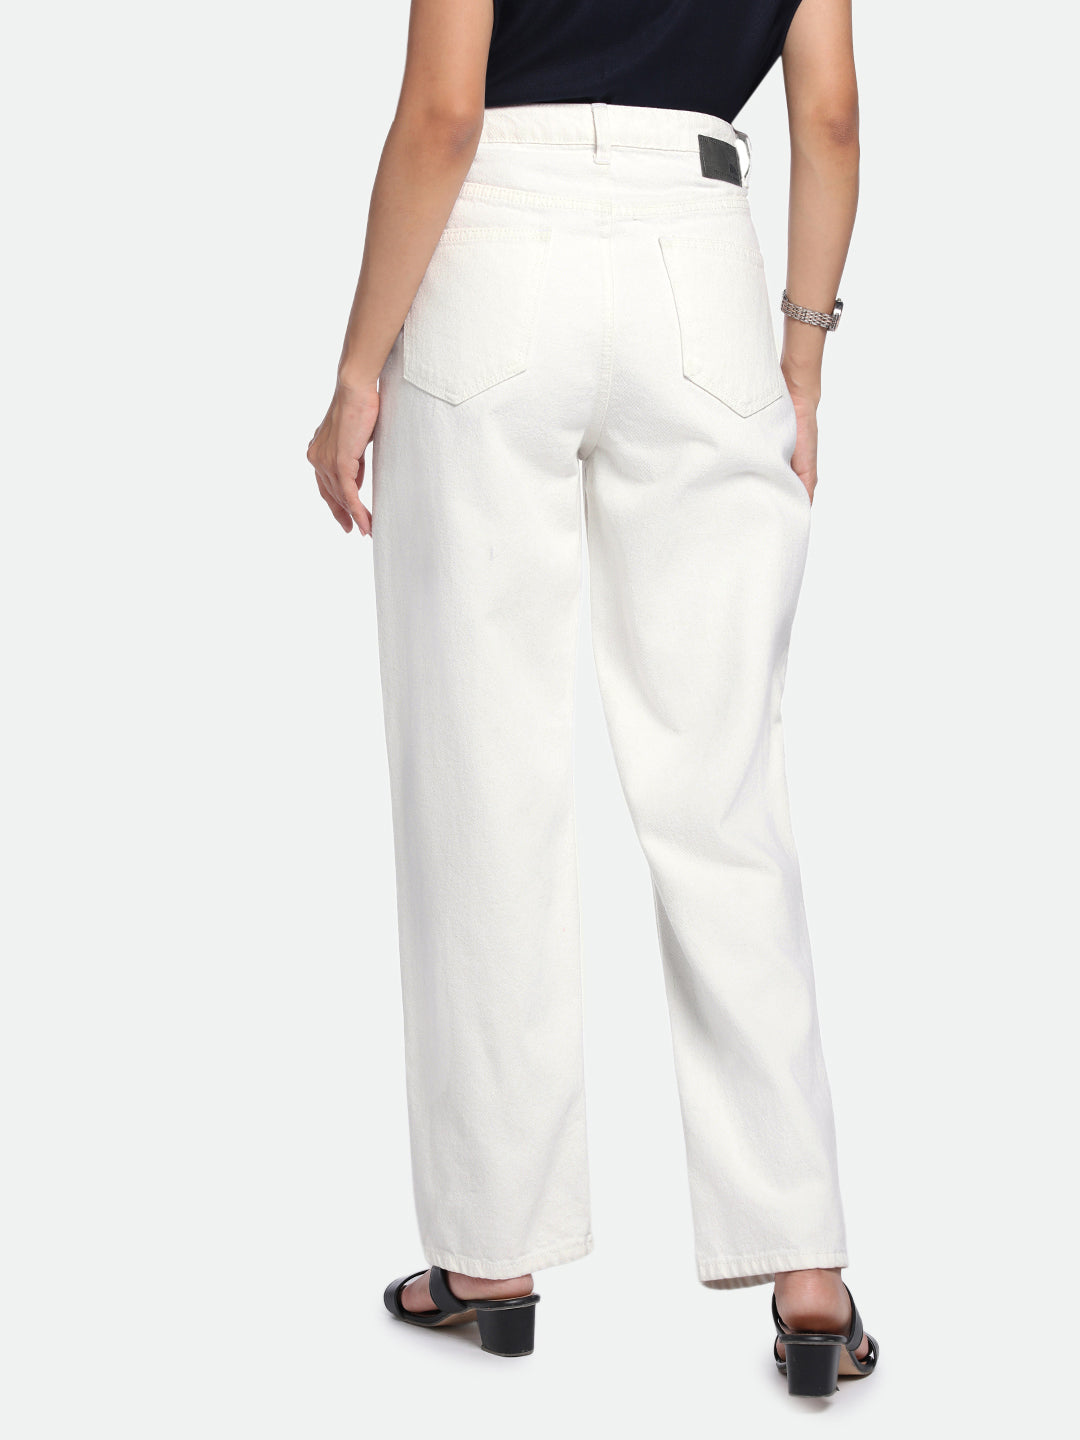 DL Woman White Relaxed Fit Jeans